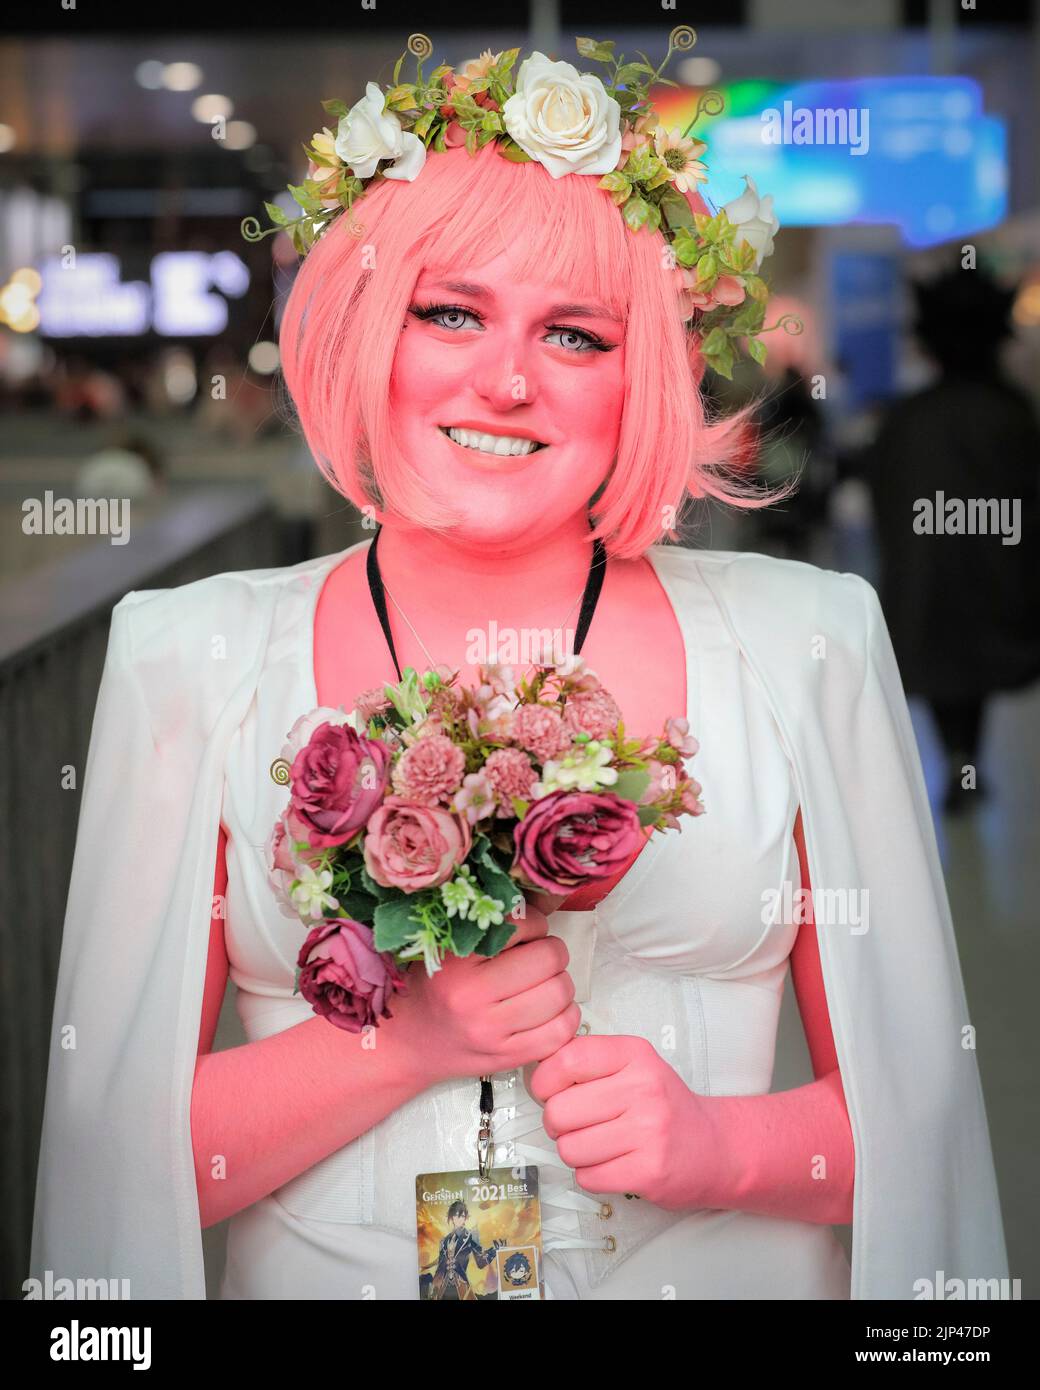 Persephone charactcostume er from web comic Lore Olympus, female cosplayer posing  in outfit with pink skin and hair, MCM Comic Con London Stock Photo